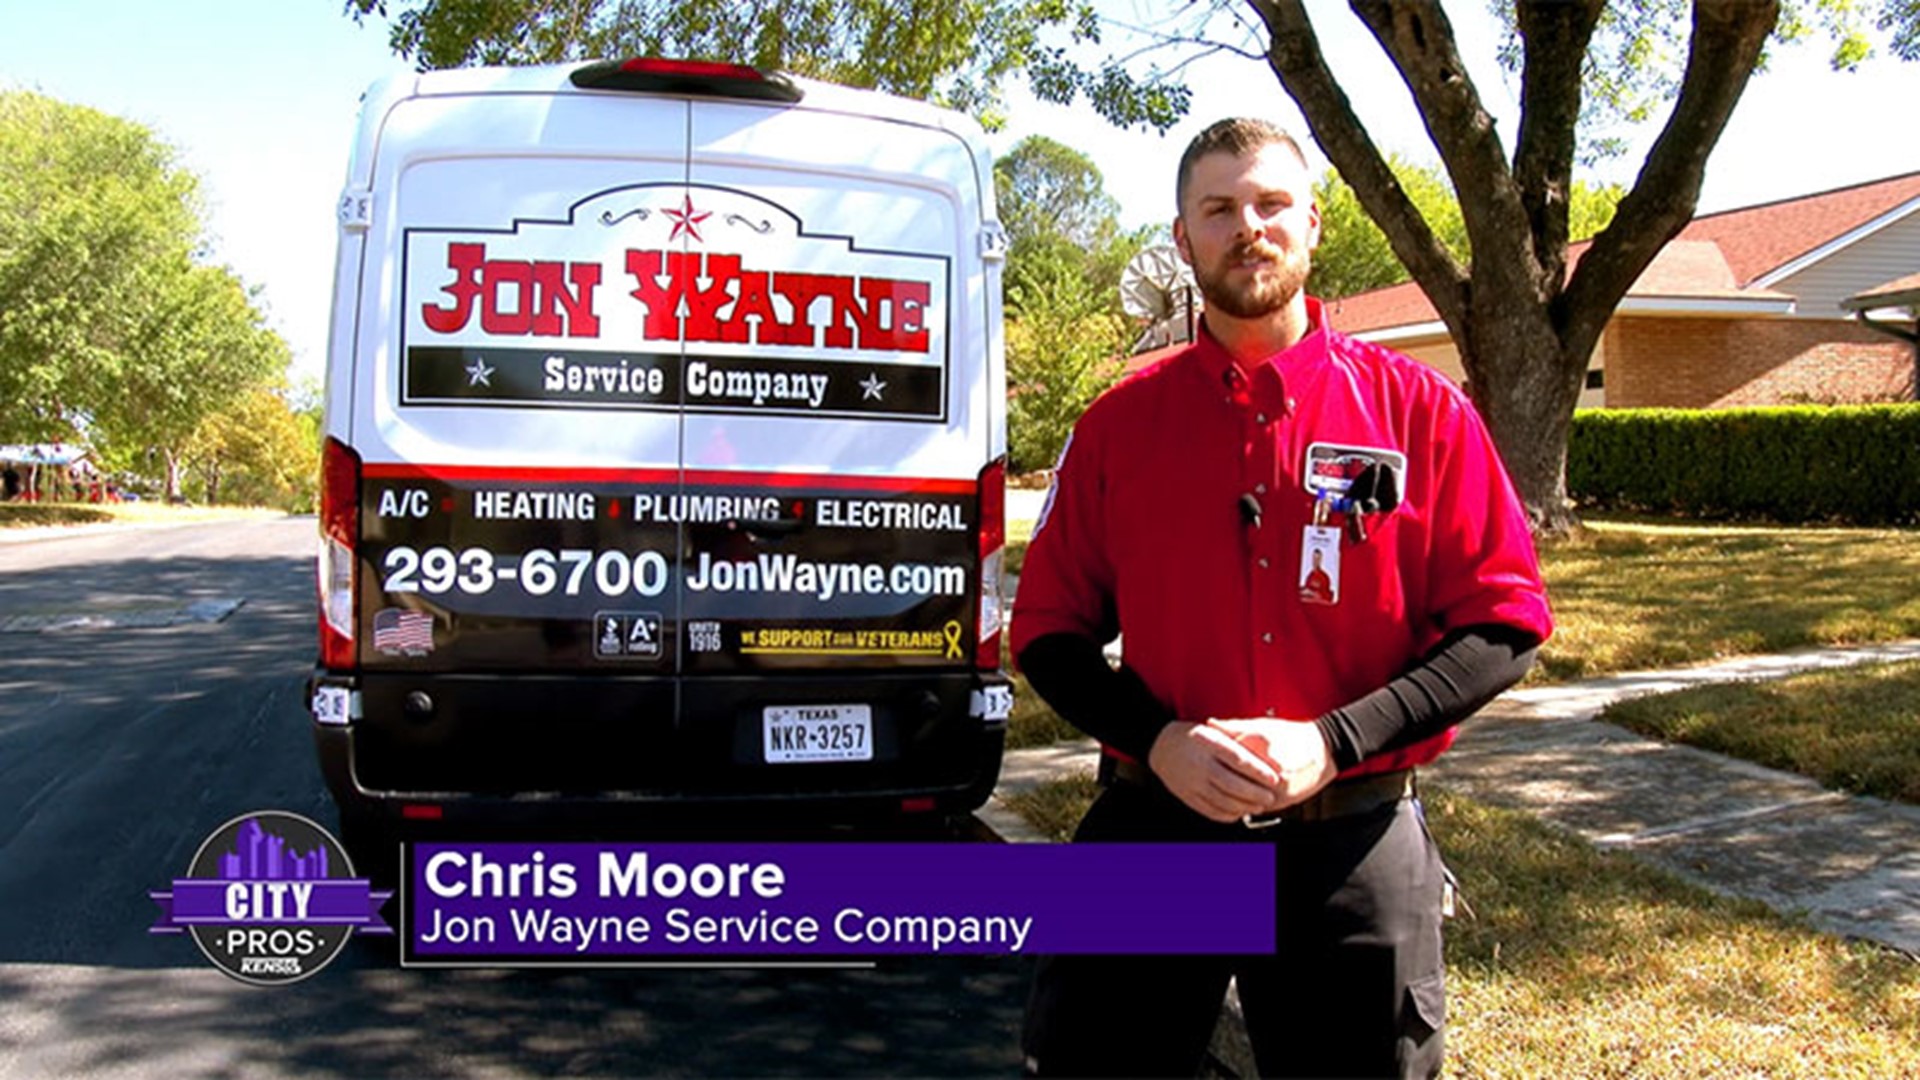 You can get your furnace checked with Jon Wayne before cool weather this winter.